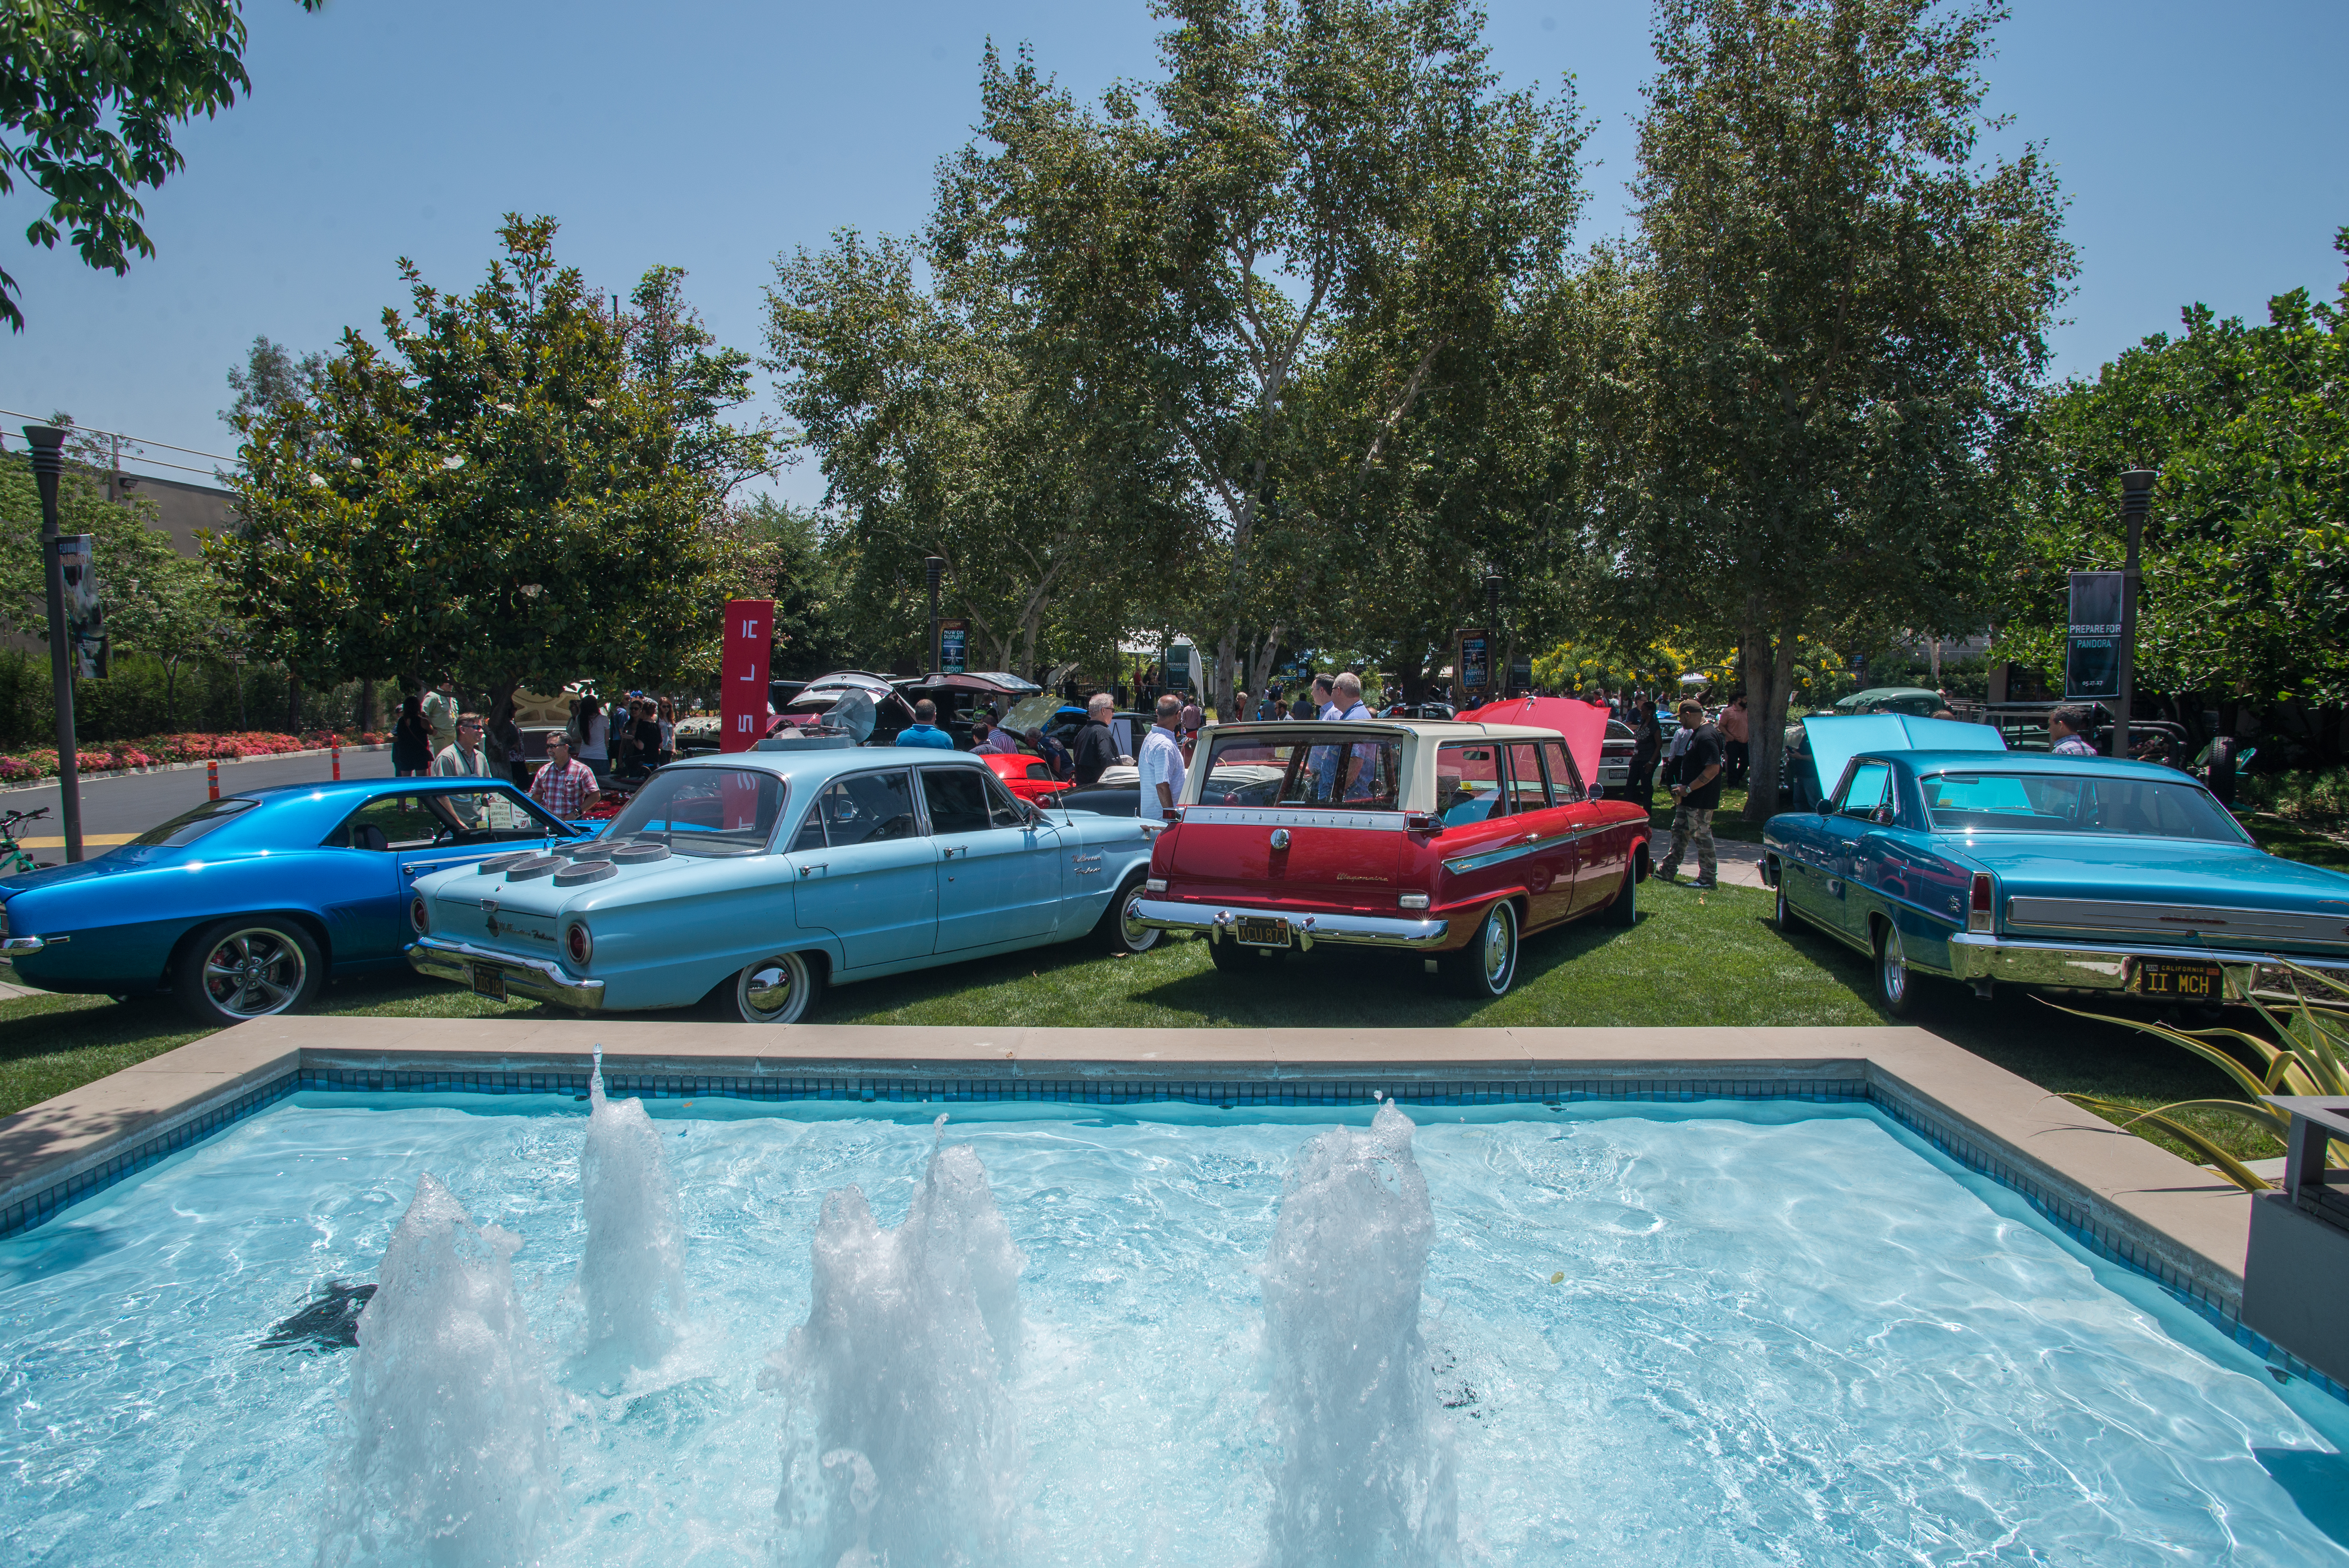 Imagineers exploring different classic cars at WDI's Car Show.